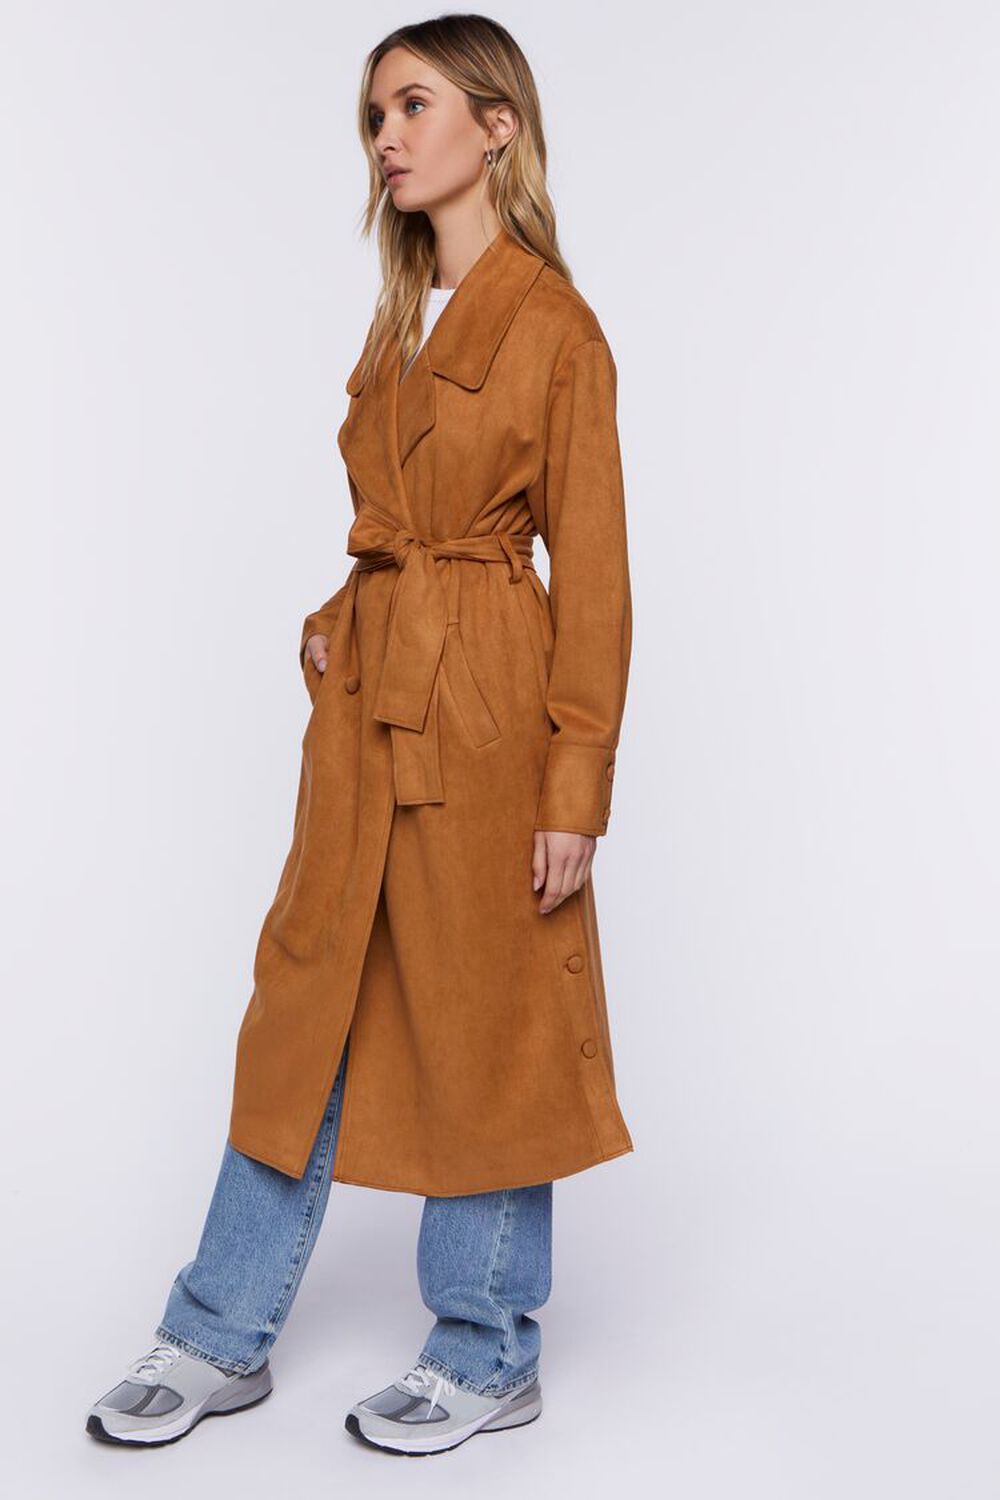 CAMEL Faux Suede Belted Trench Coat, image 2